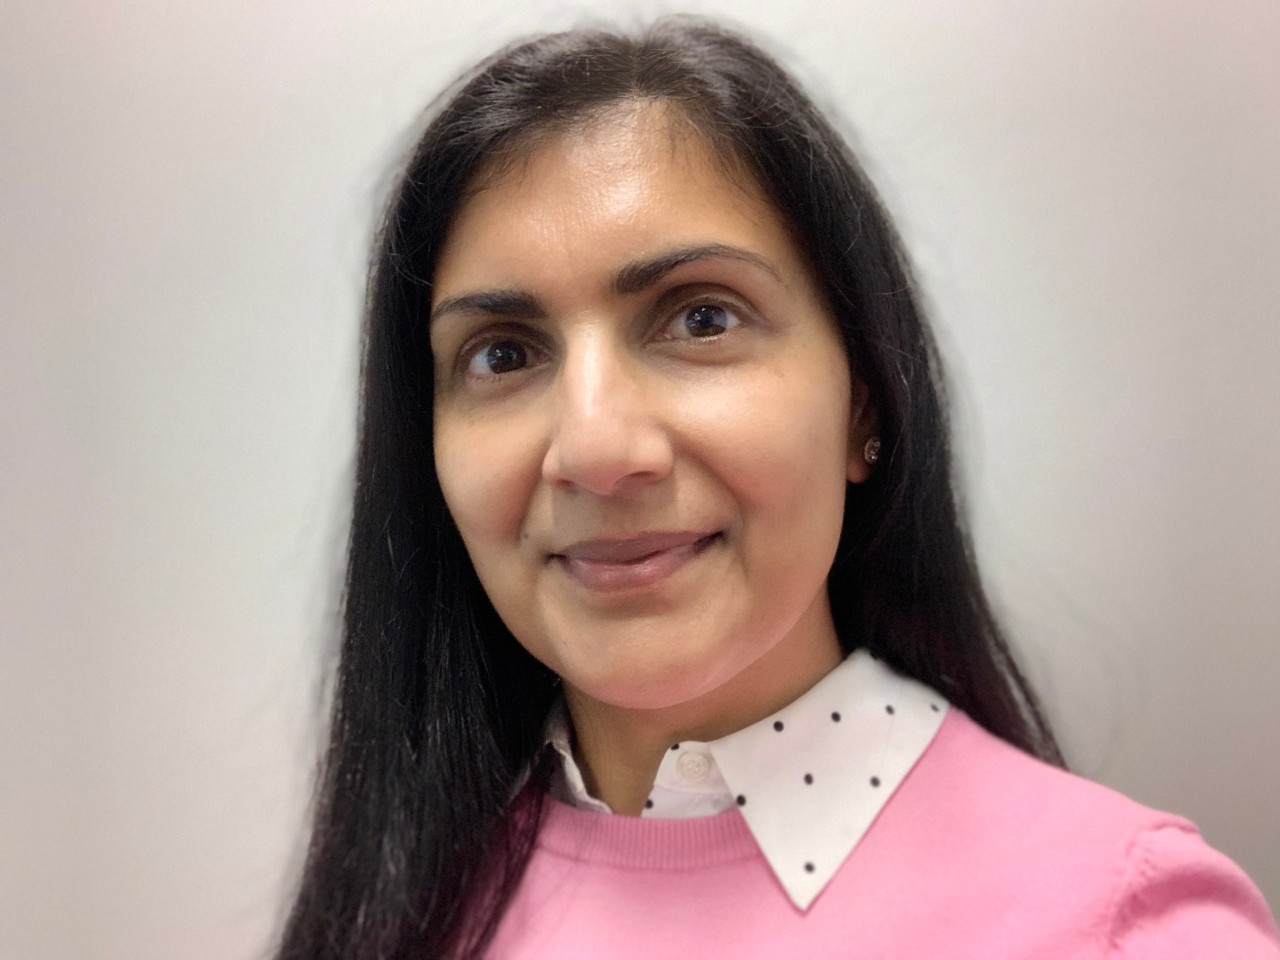 Suman Jiwani smiles at the camera against a grey backdrop. She is wearing a pink shirt with a white-and-black polka-dot collar.